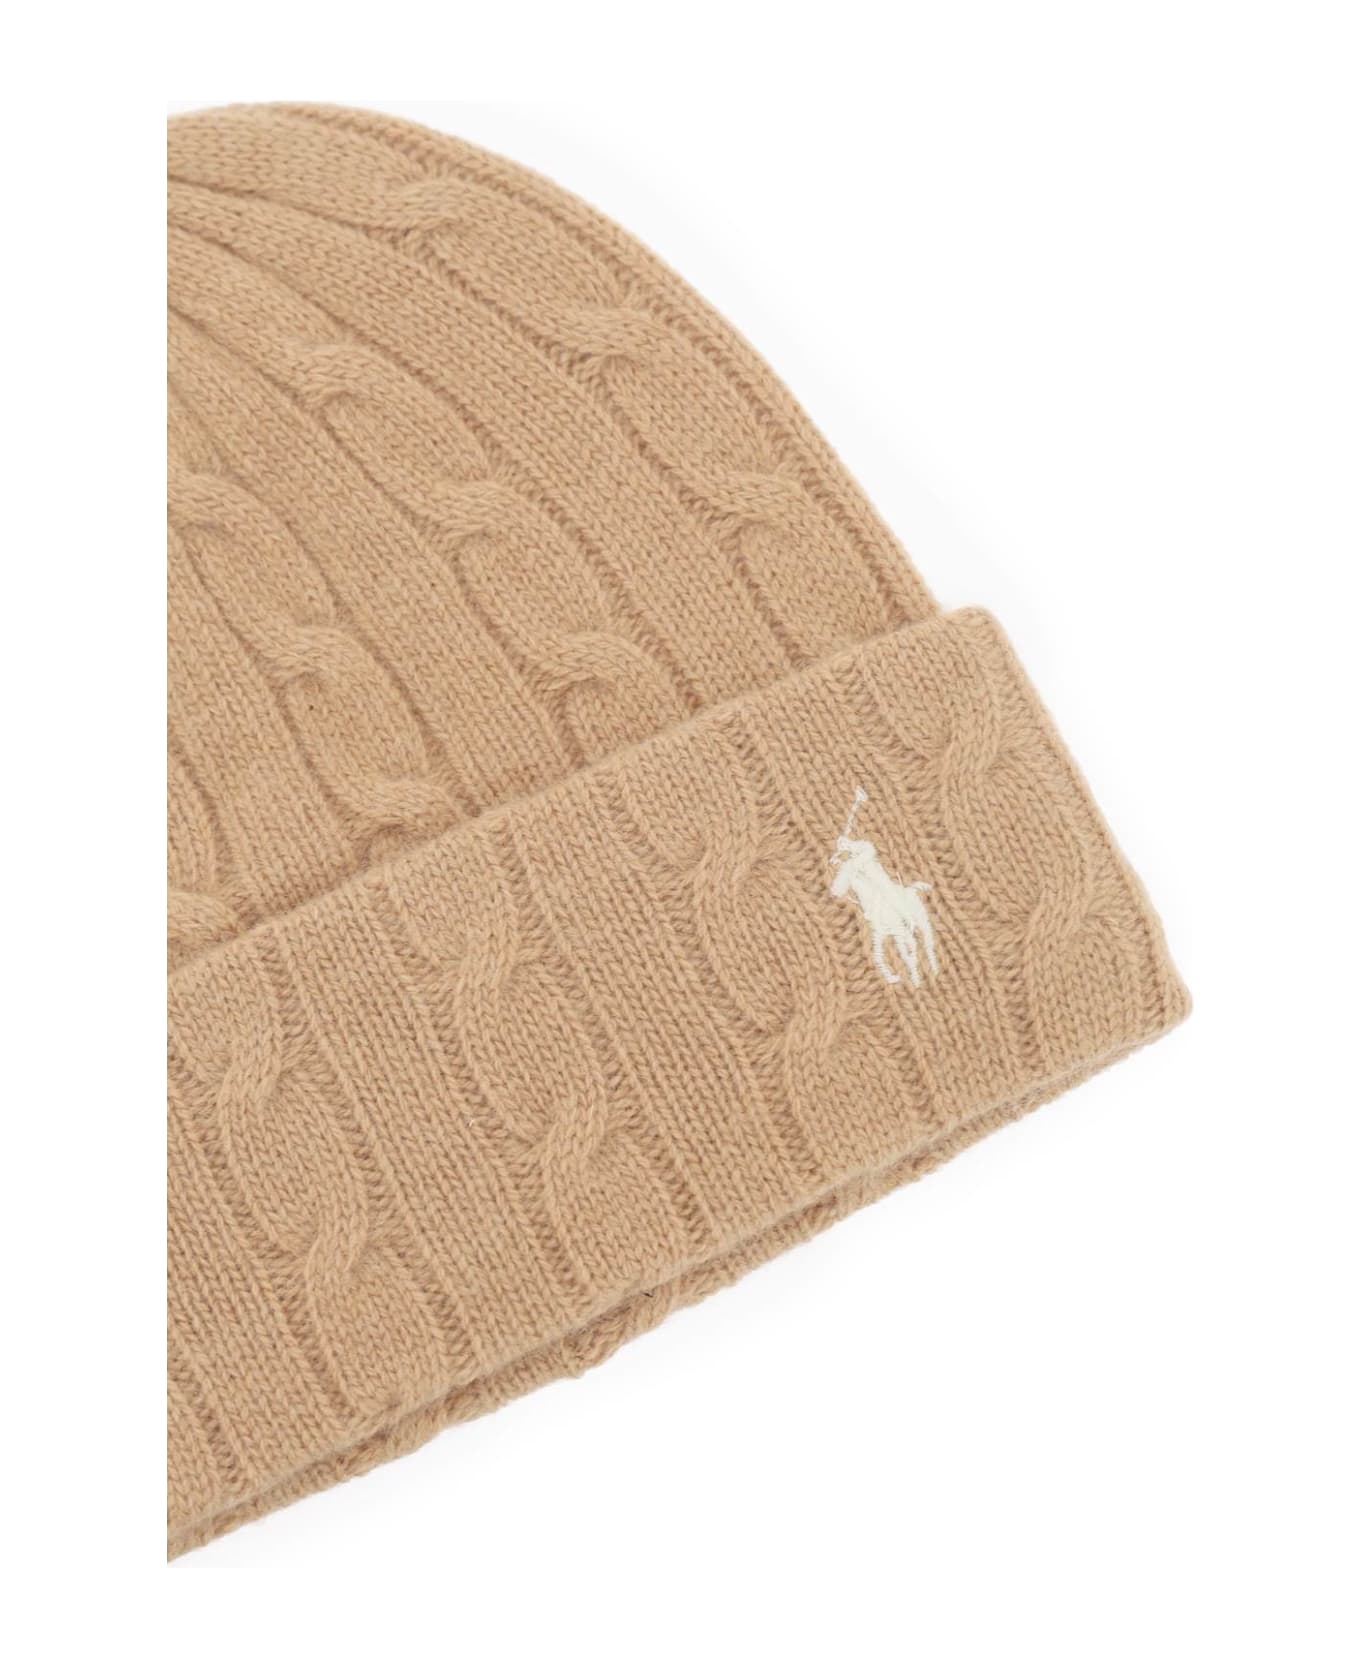 Polo Ralph Lauren Cable-knit Cashmere And Wool Beanie Hat - CAMEL (Beige)